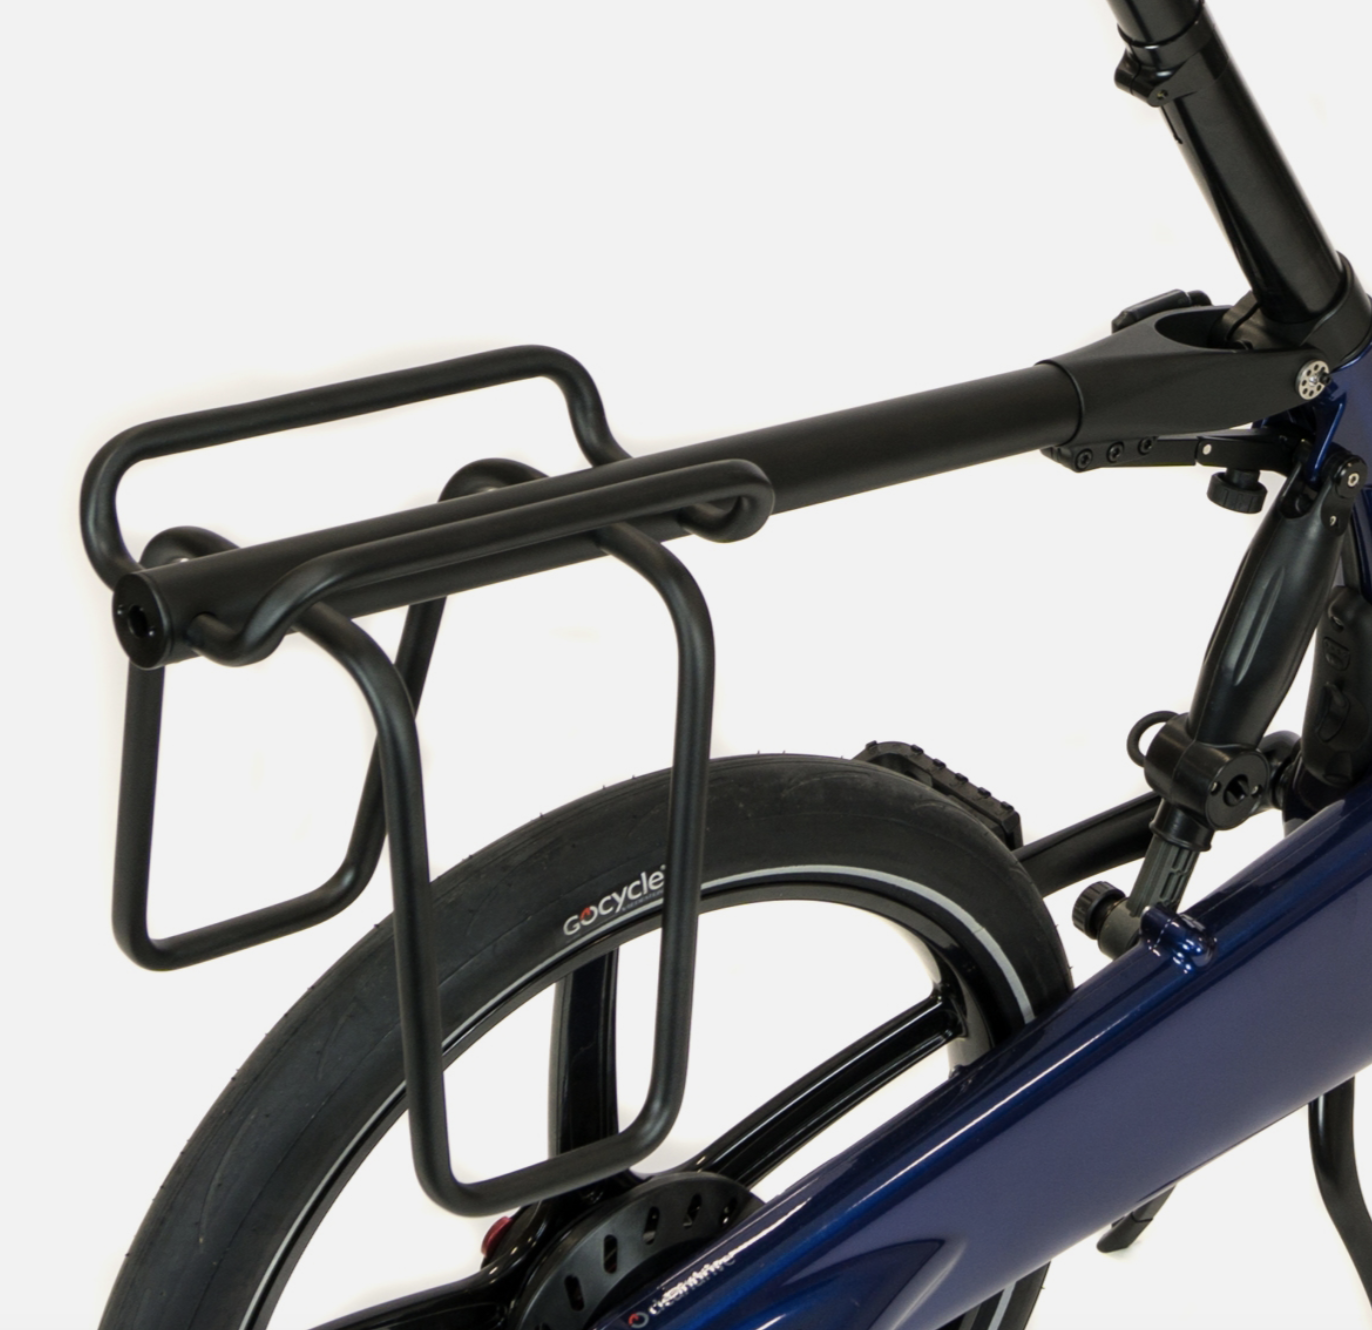 Porte Bagage Gocycle G3/GS